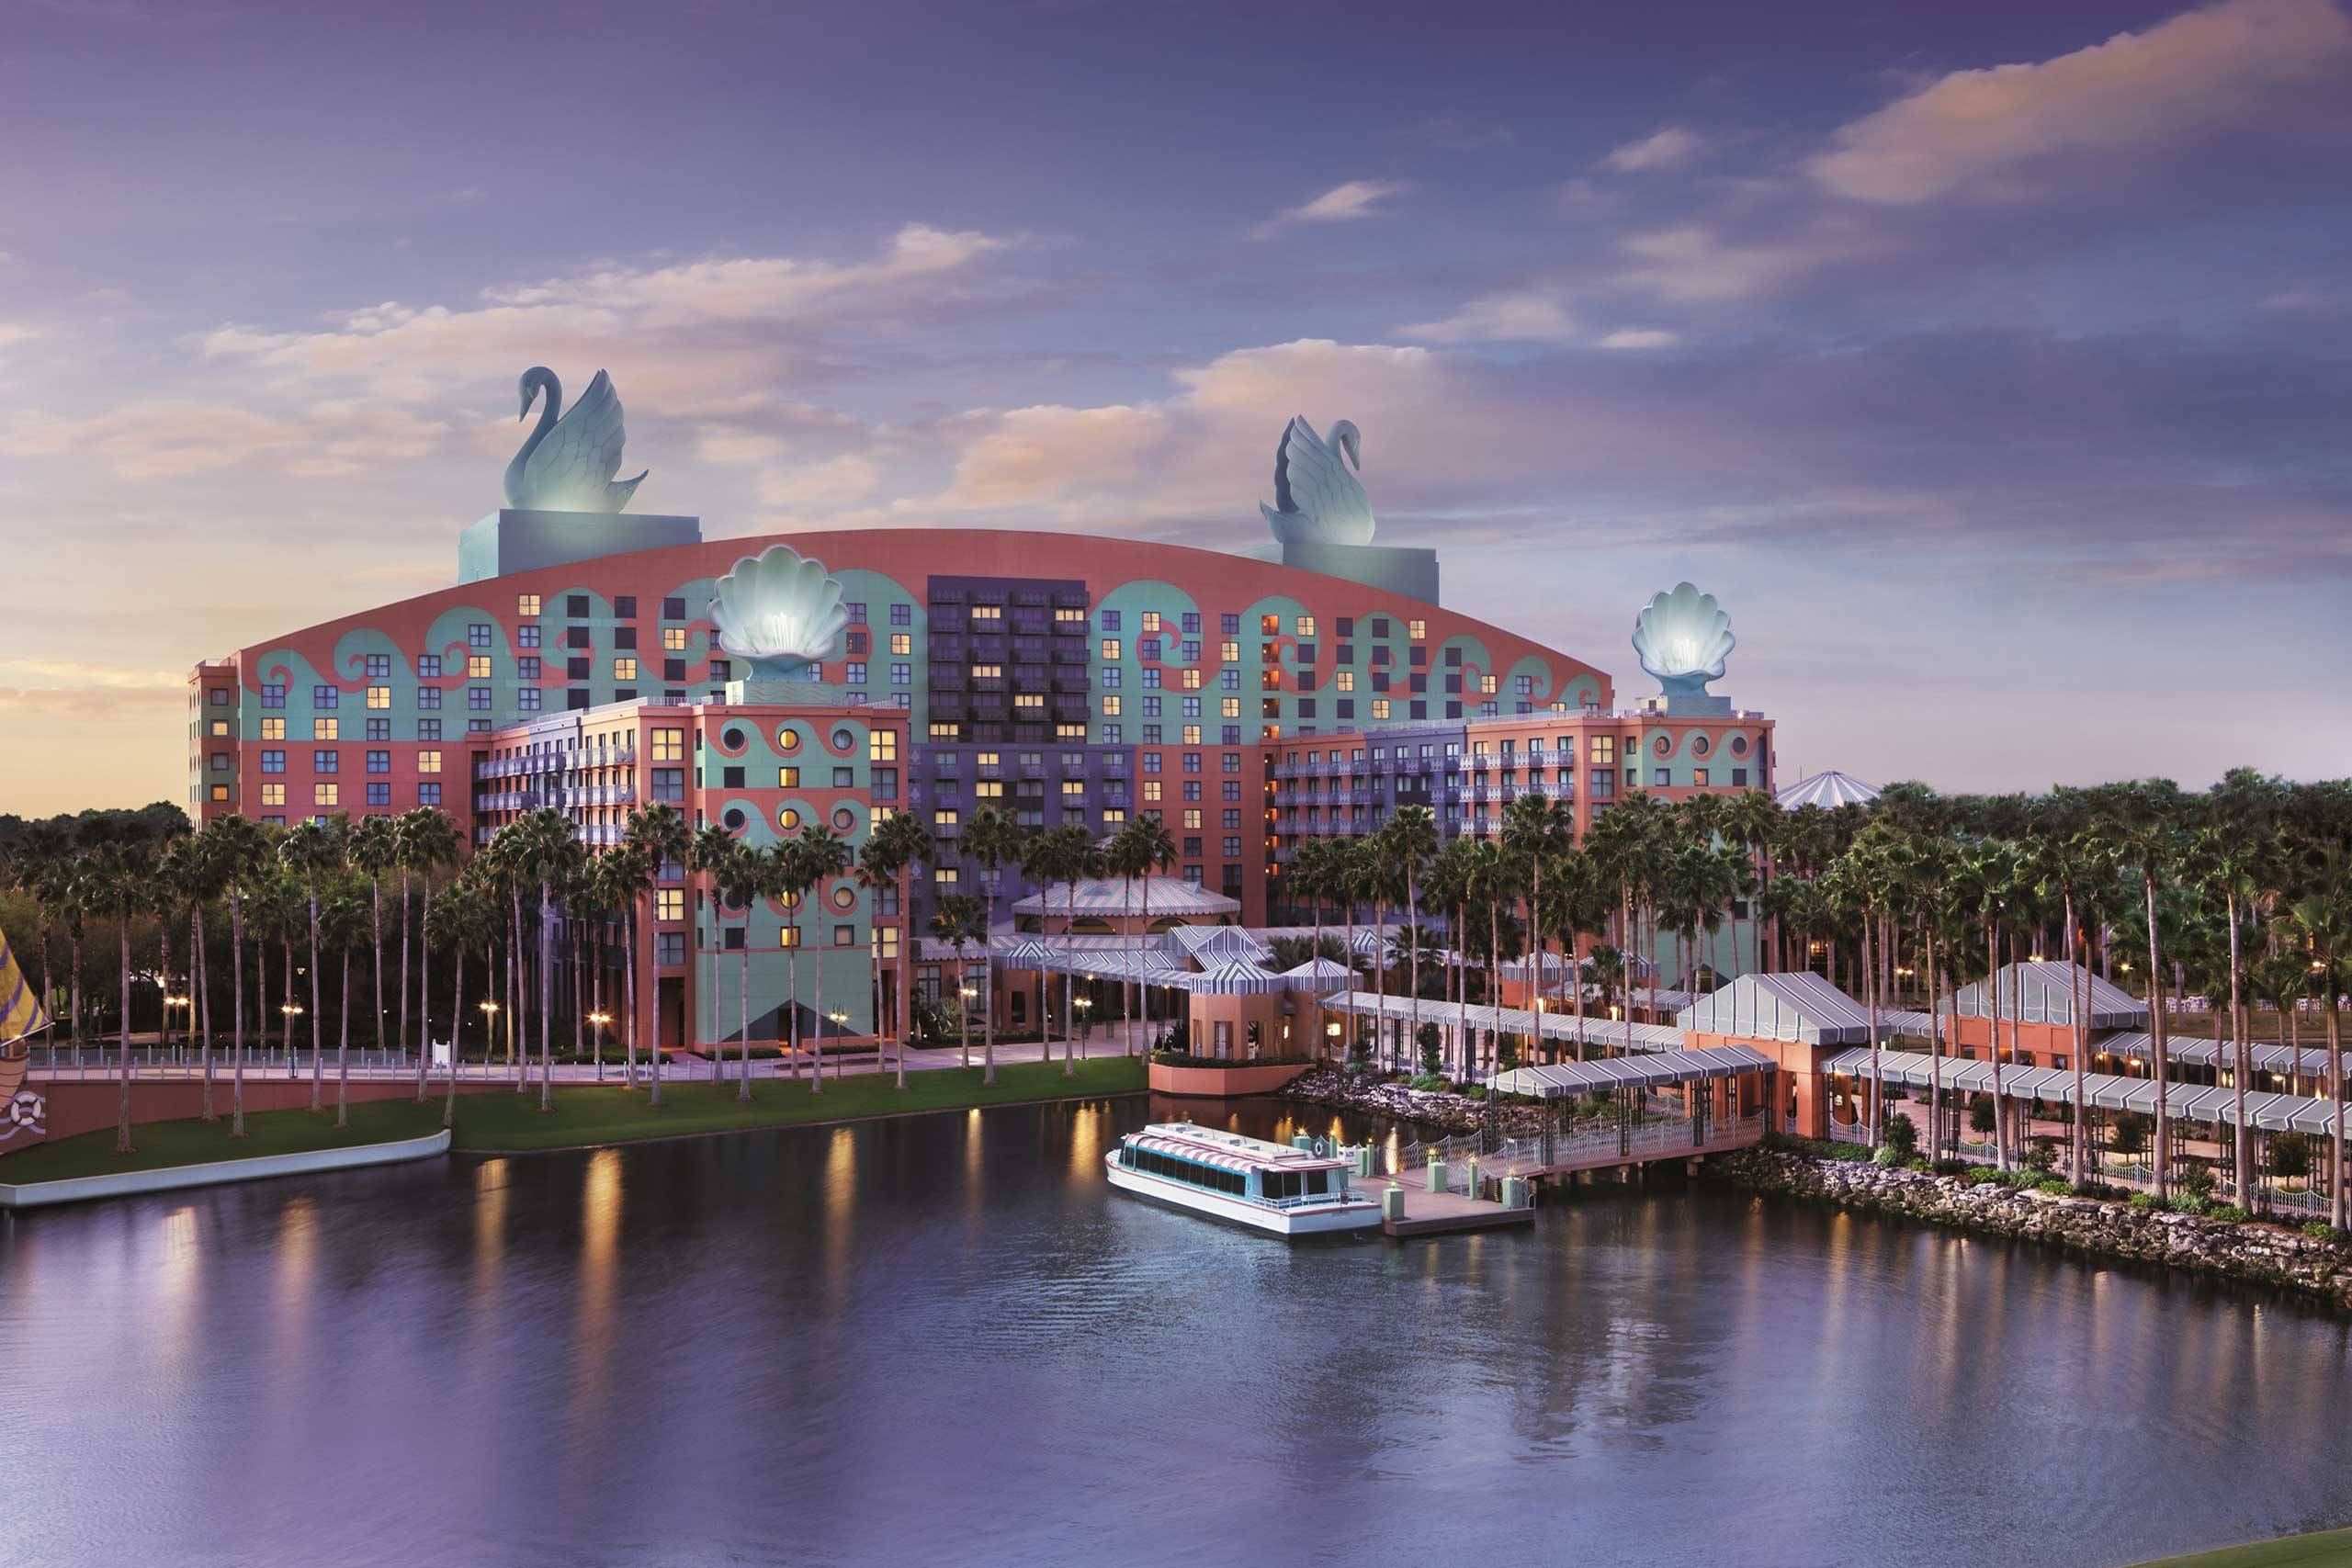 Low rates at the Walt Disney World Swan and Dolphin through late August